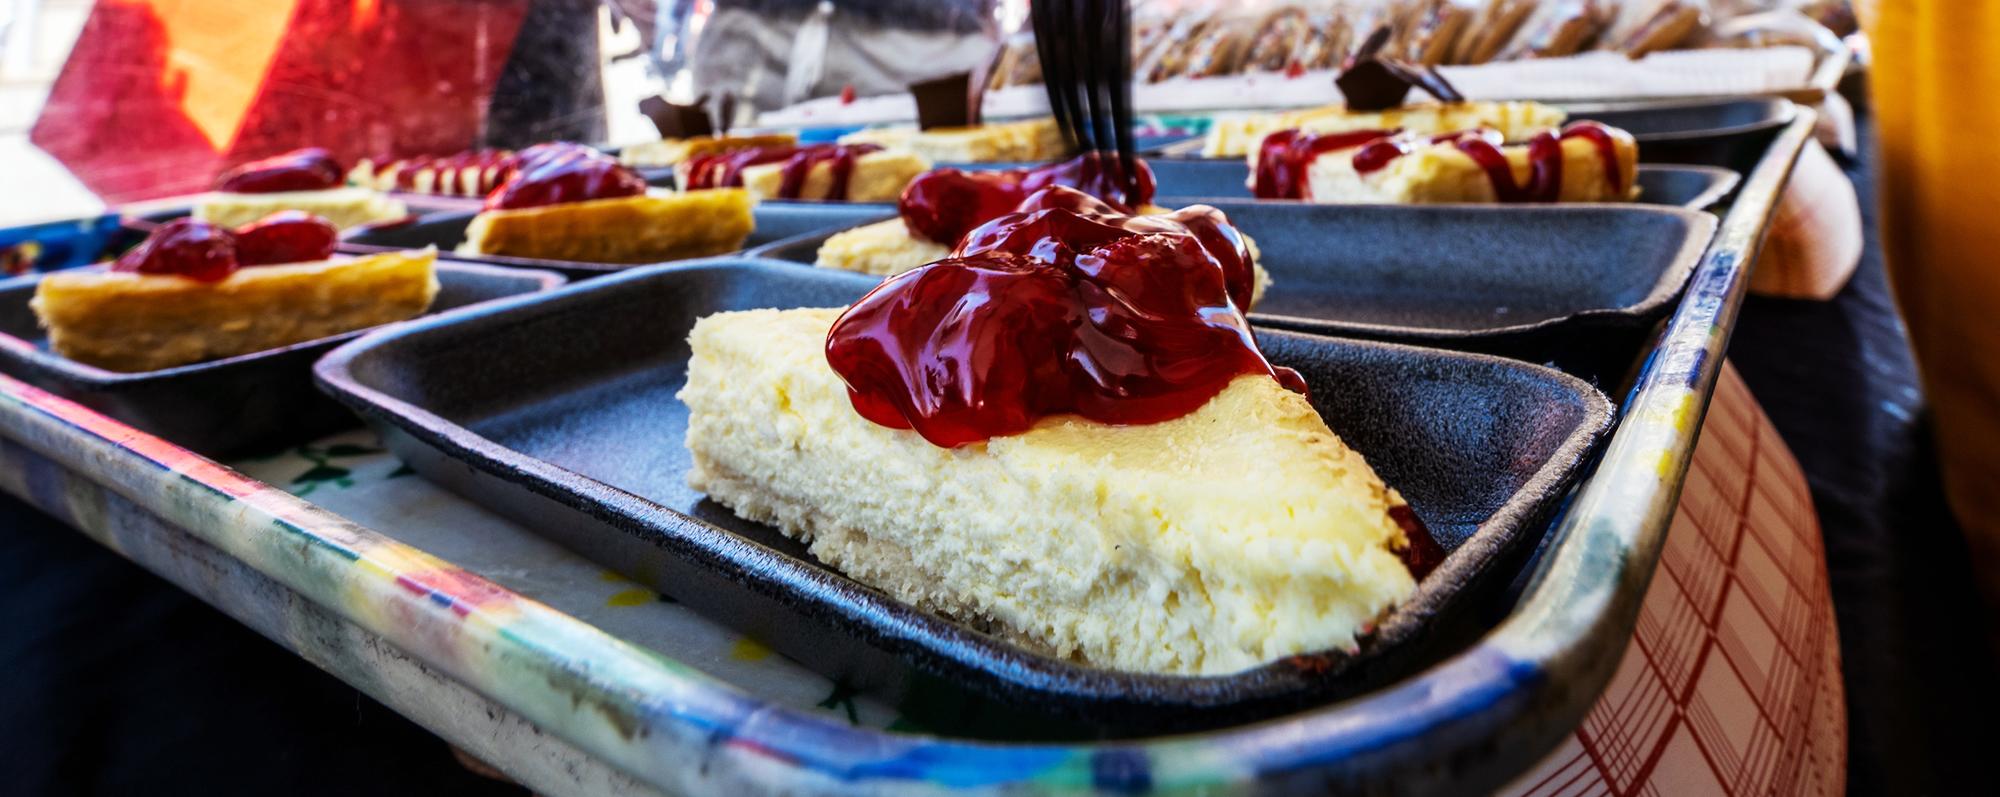 A cheesecake with cherries on top at the Taste of Buffalo festival